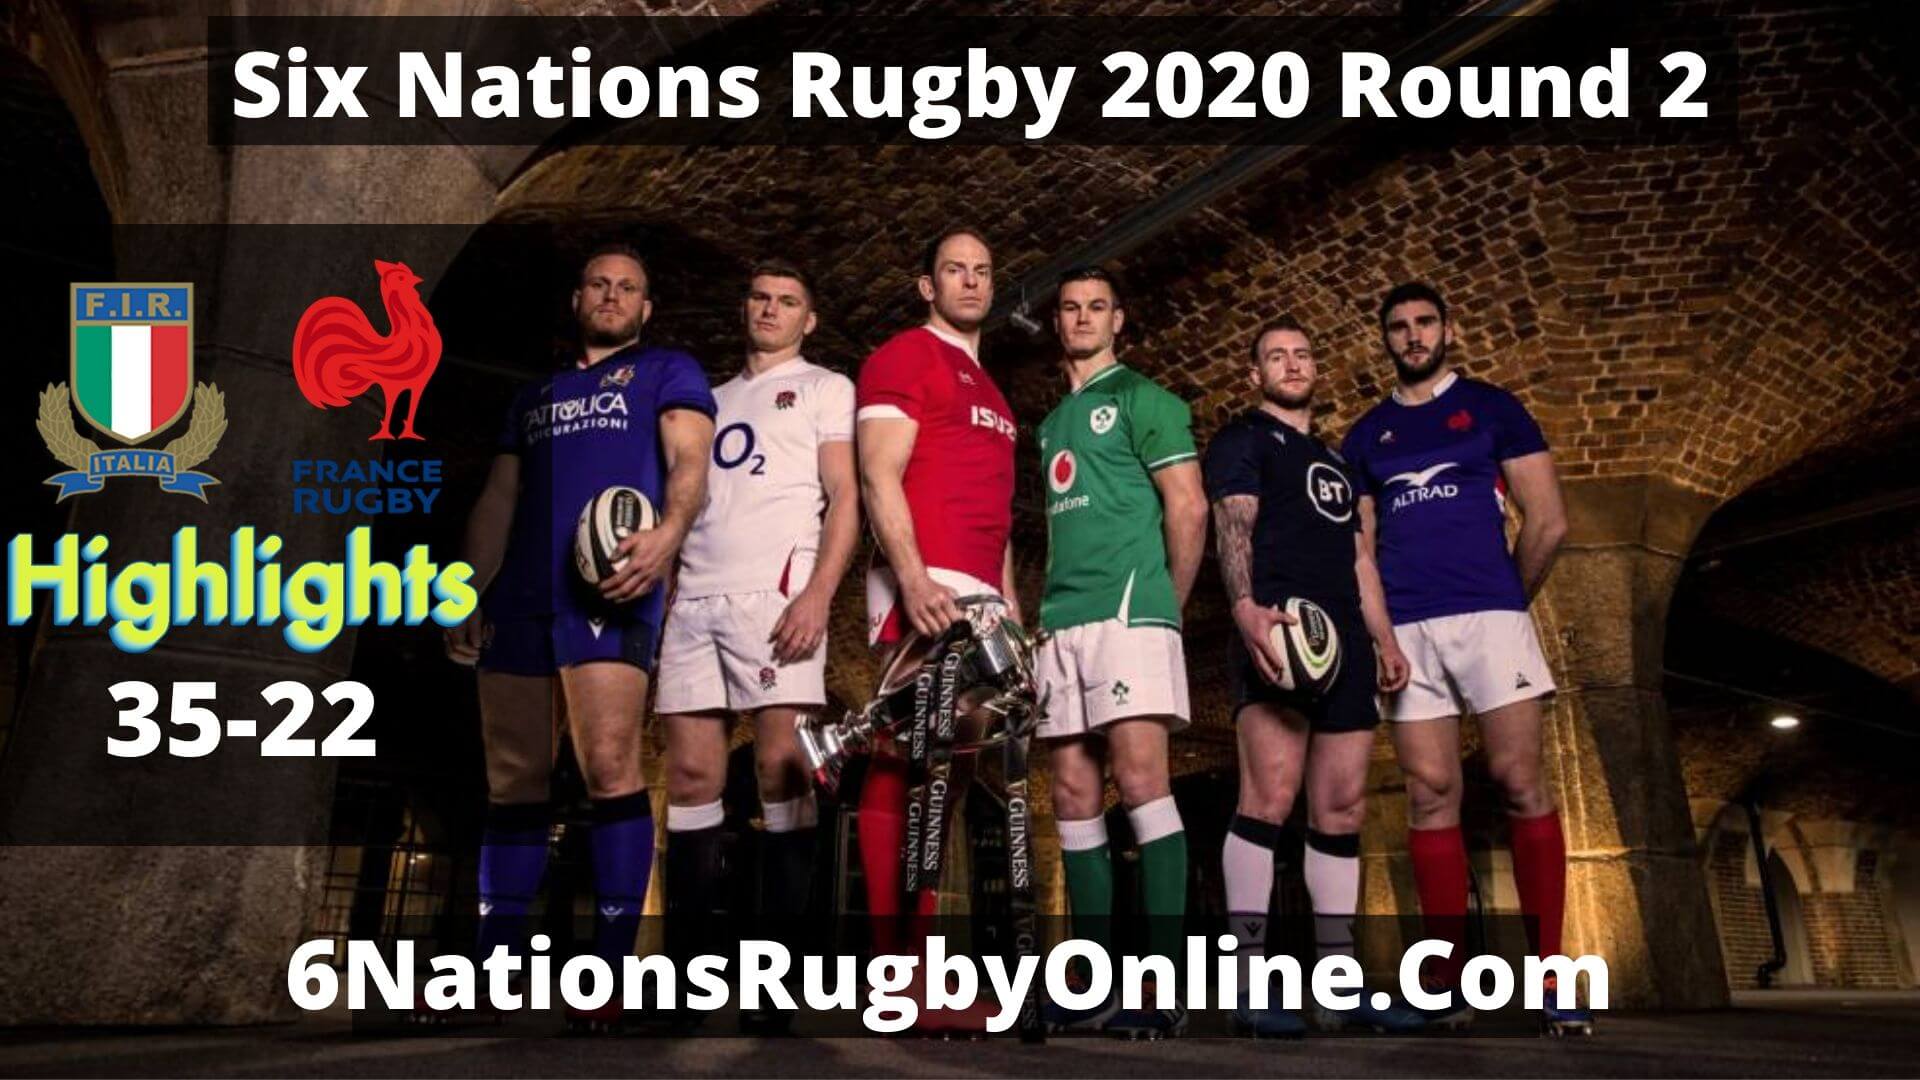 Italy Vs France Highlights 2020 Rd 2 Six Nations Rugby